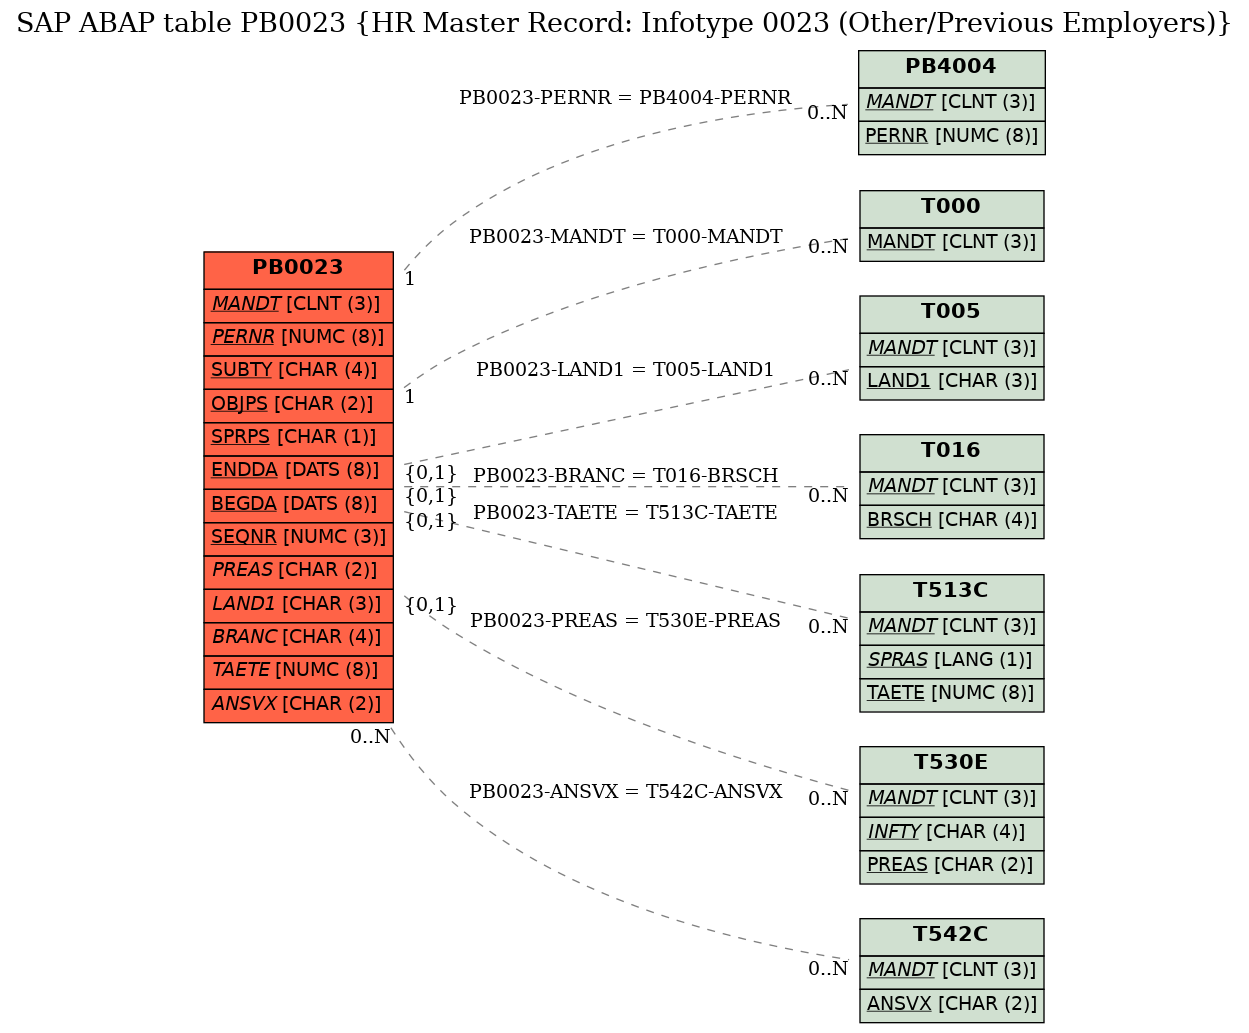 E-R Diagram for table PB0023 (HR Master Record: Infotype 0023 (Other/Previous Employers))